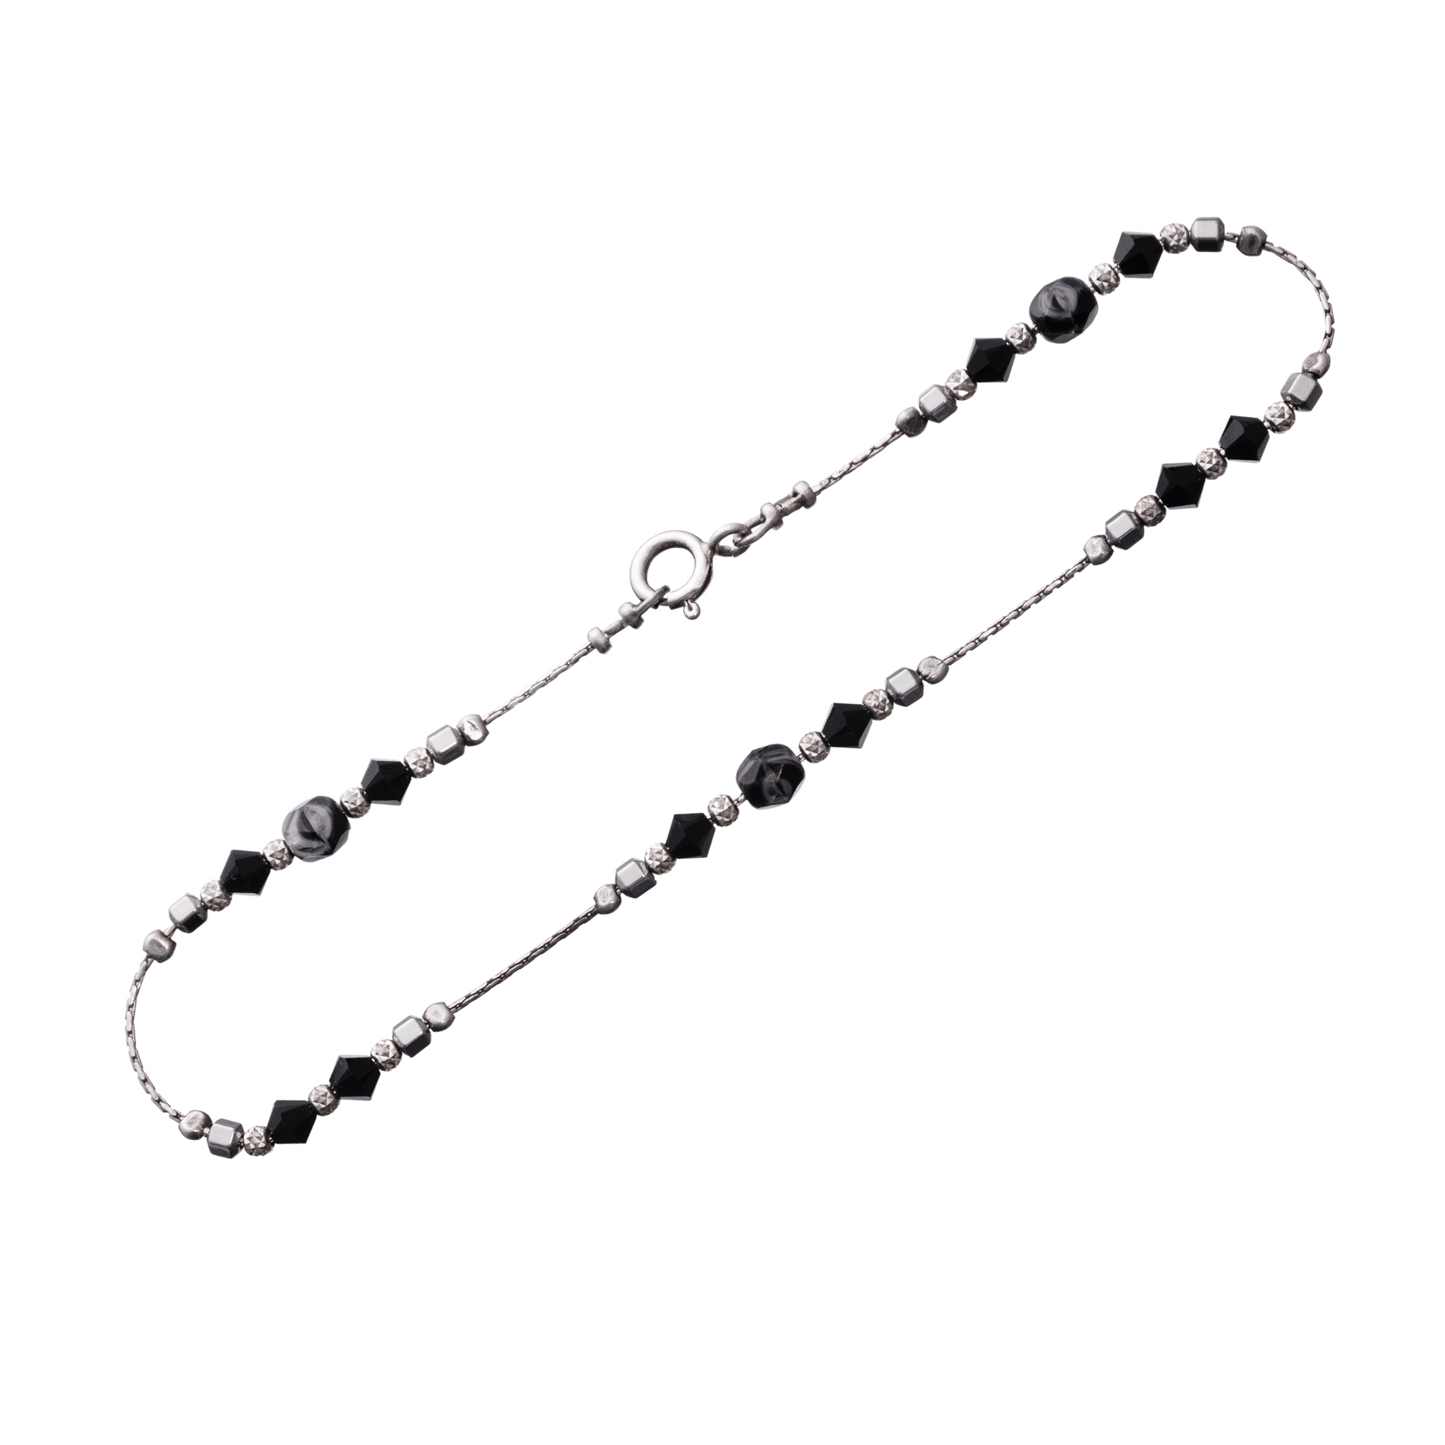 Sterling silver anklet containing black coral stone and sterling silver beads